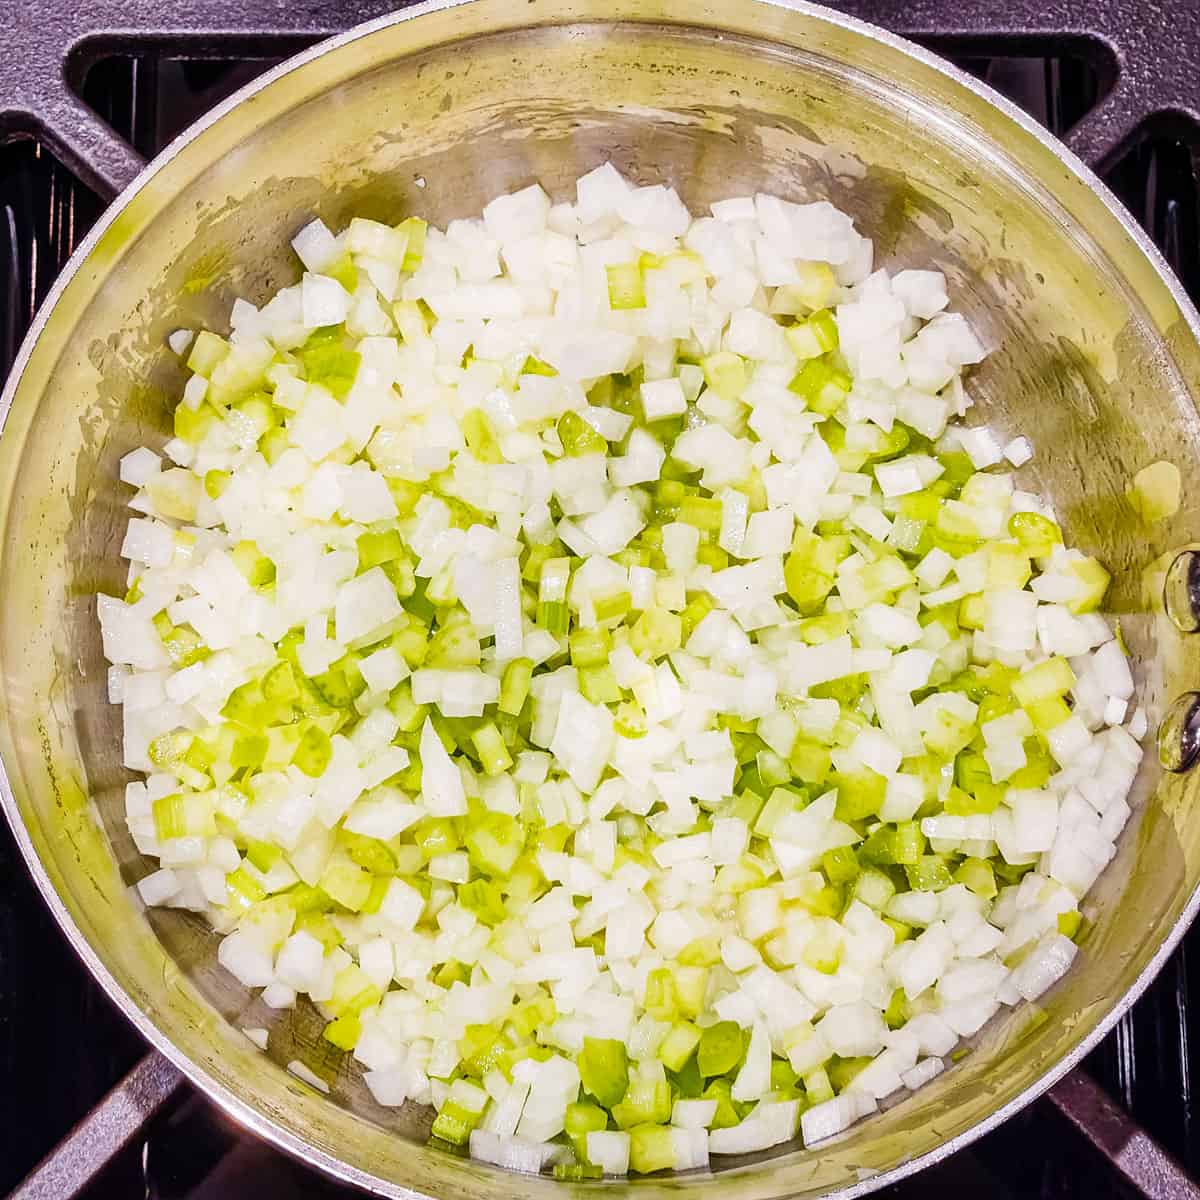 Onions and celery being cooked in a saucepan.